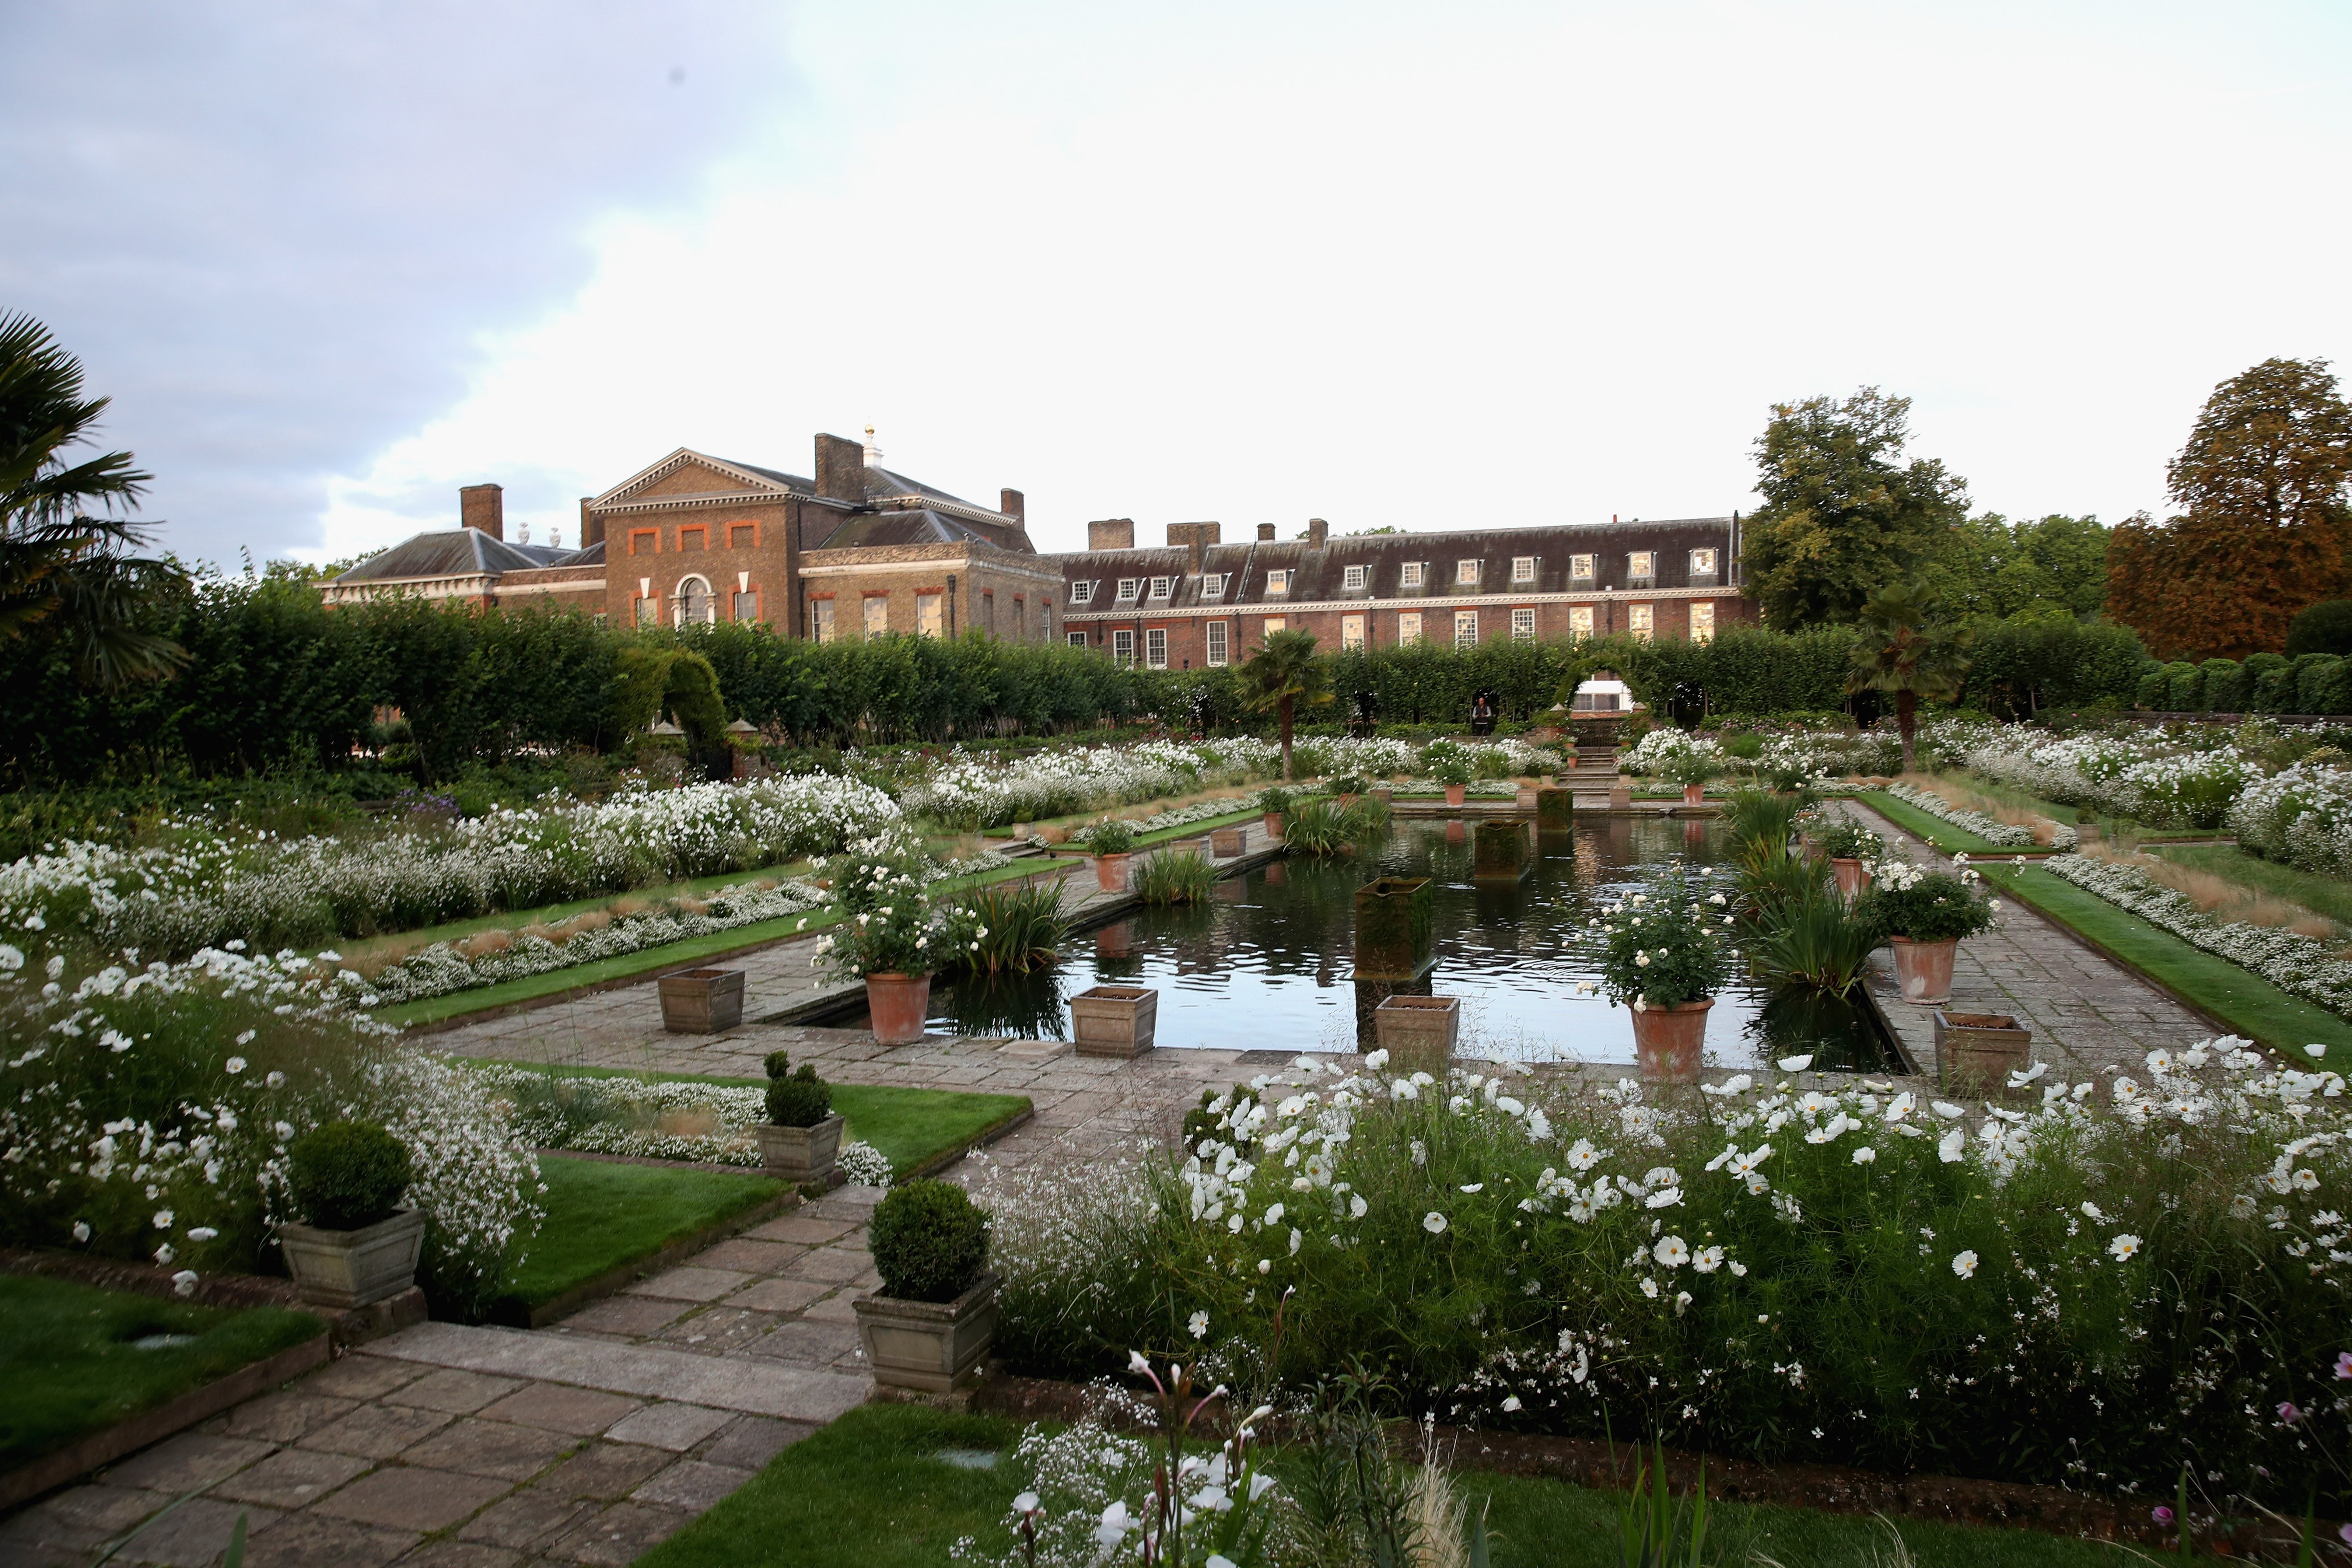 General view of the Princess Diana 'White Garden' at Kensington Palace. (Chris Jackson - Getty Images)